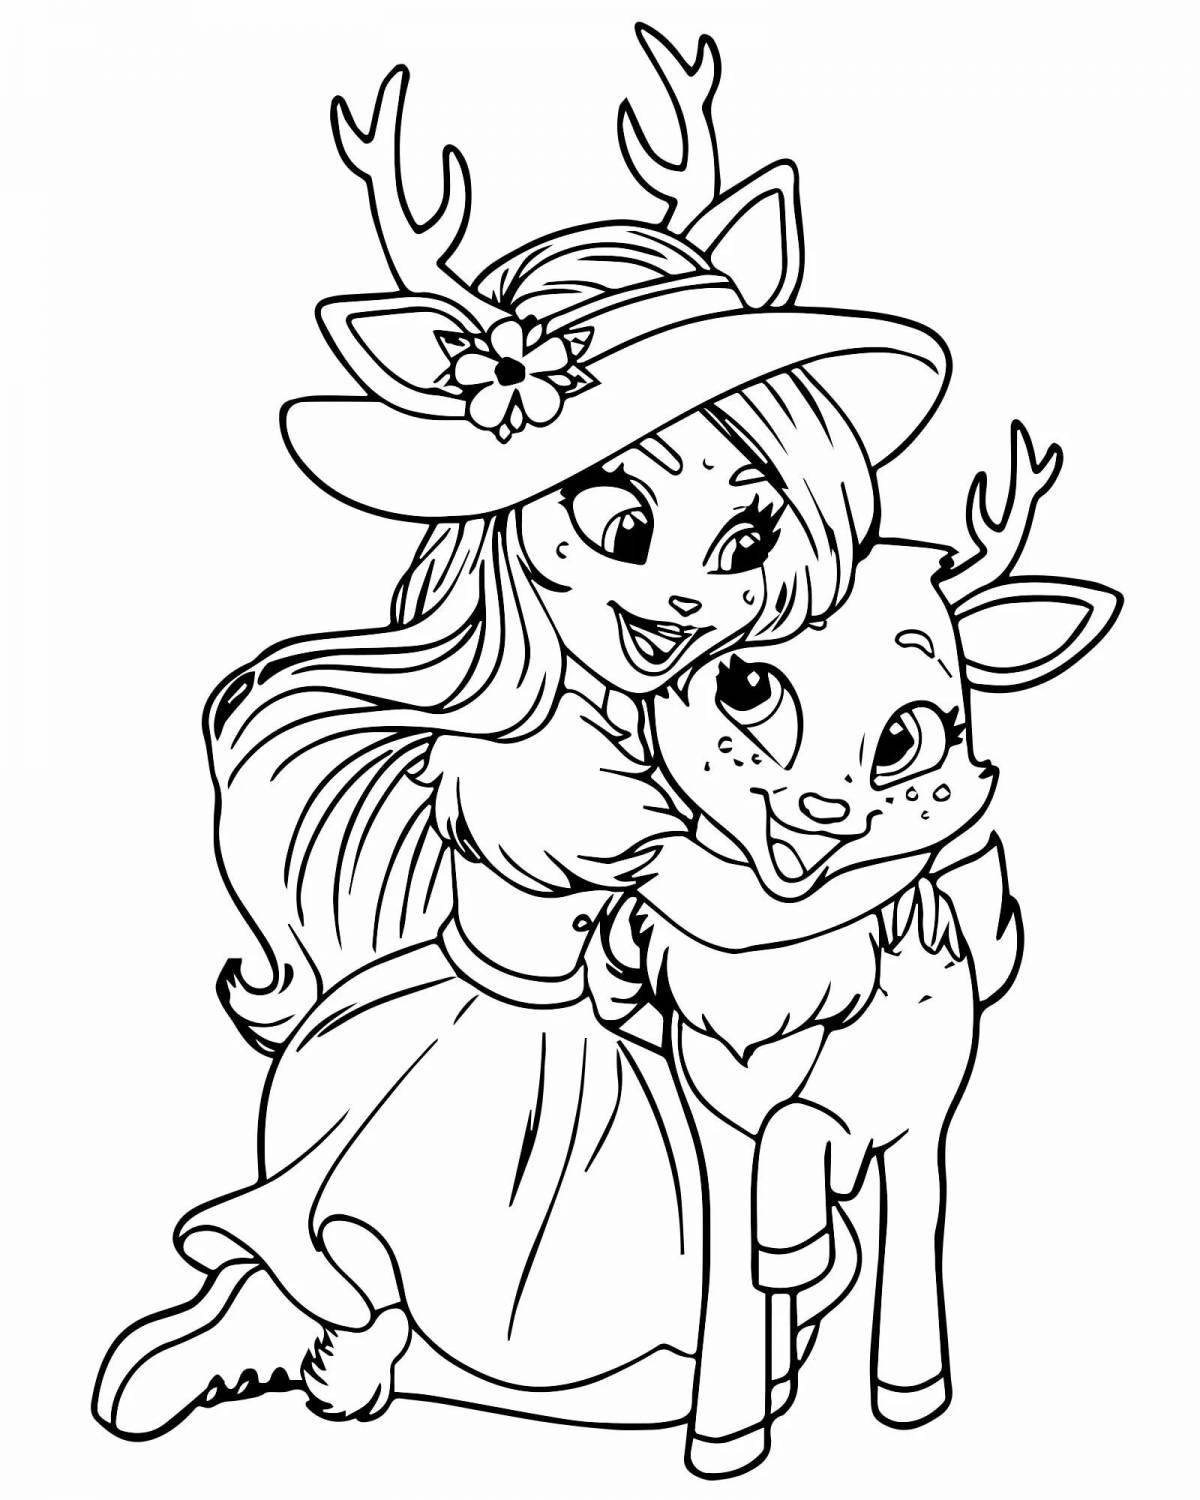 Lovely enchantimals unicorn coloring page